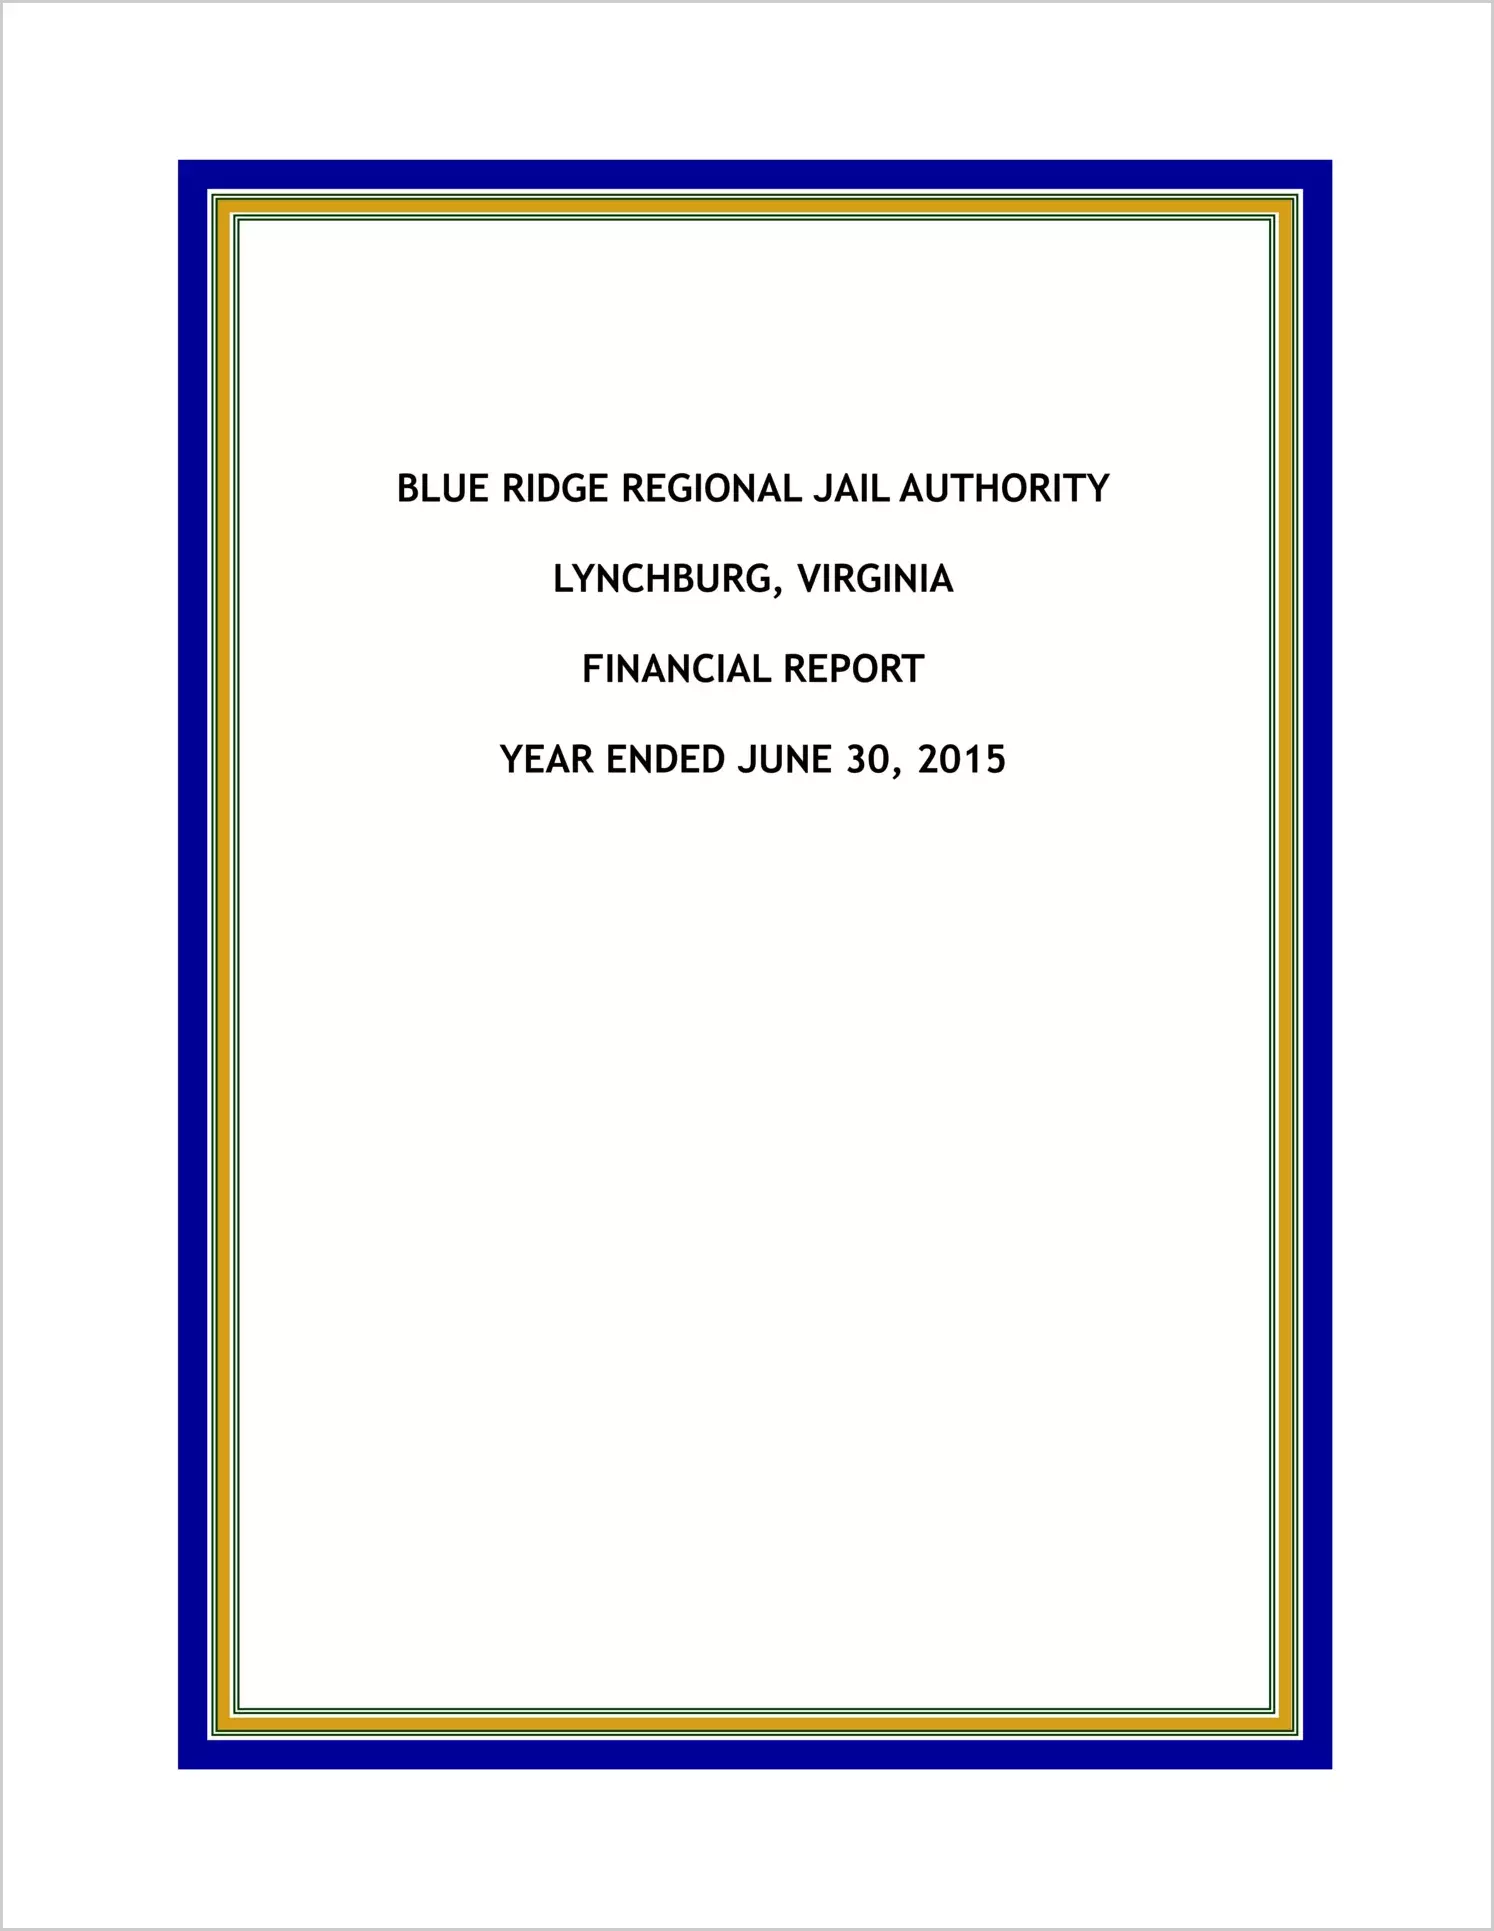 2015 ABC/Other Annual Financial Report  for Blue Ridge Regional Jail Authority